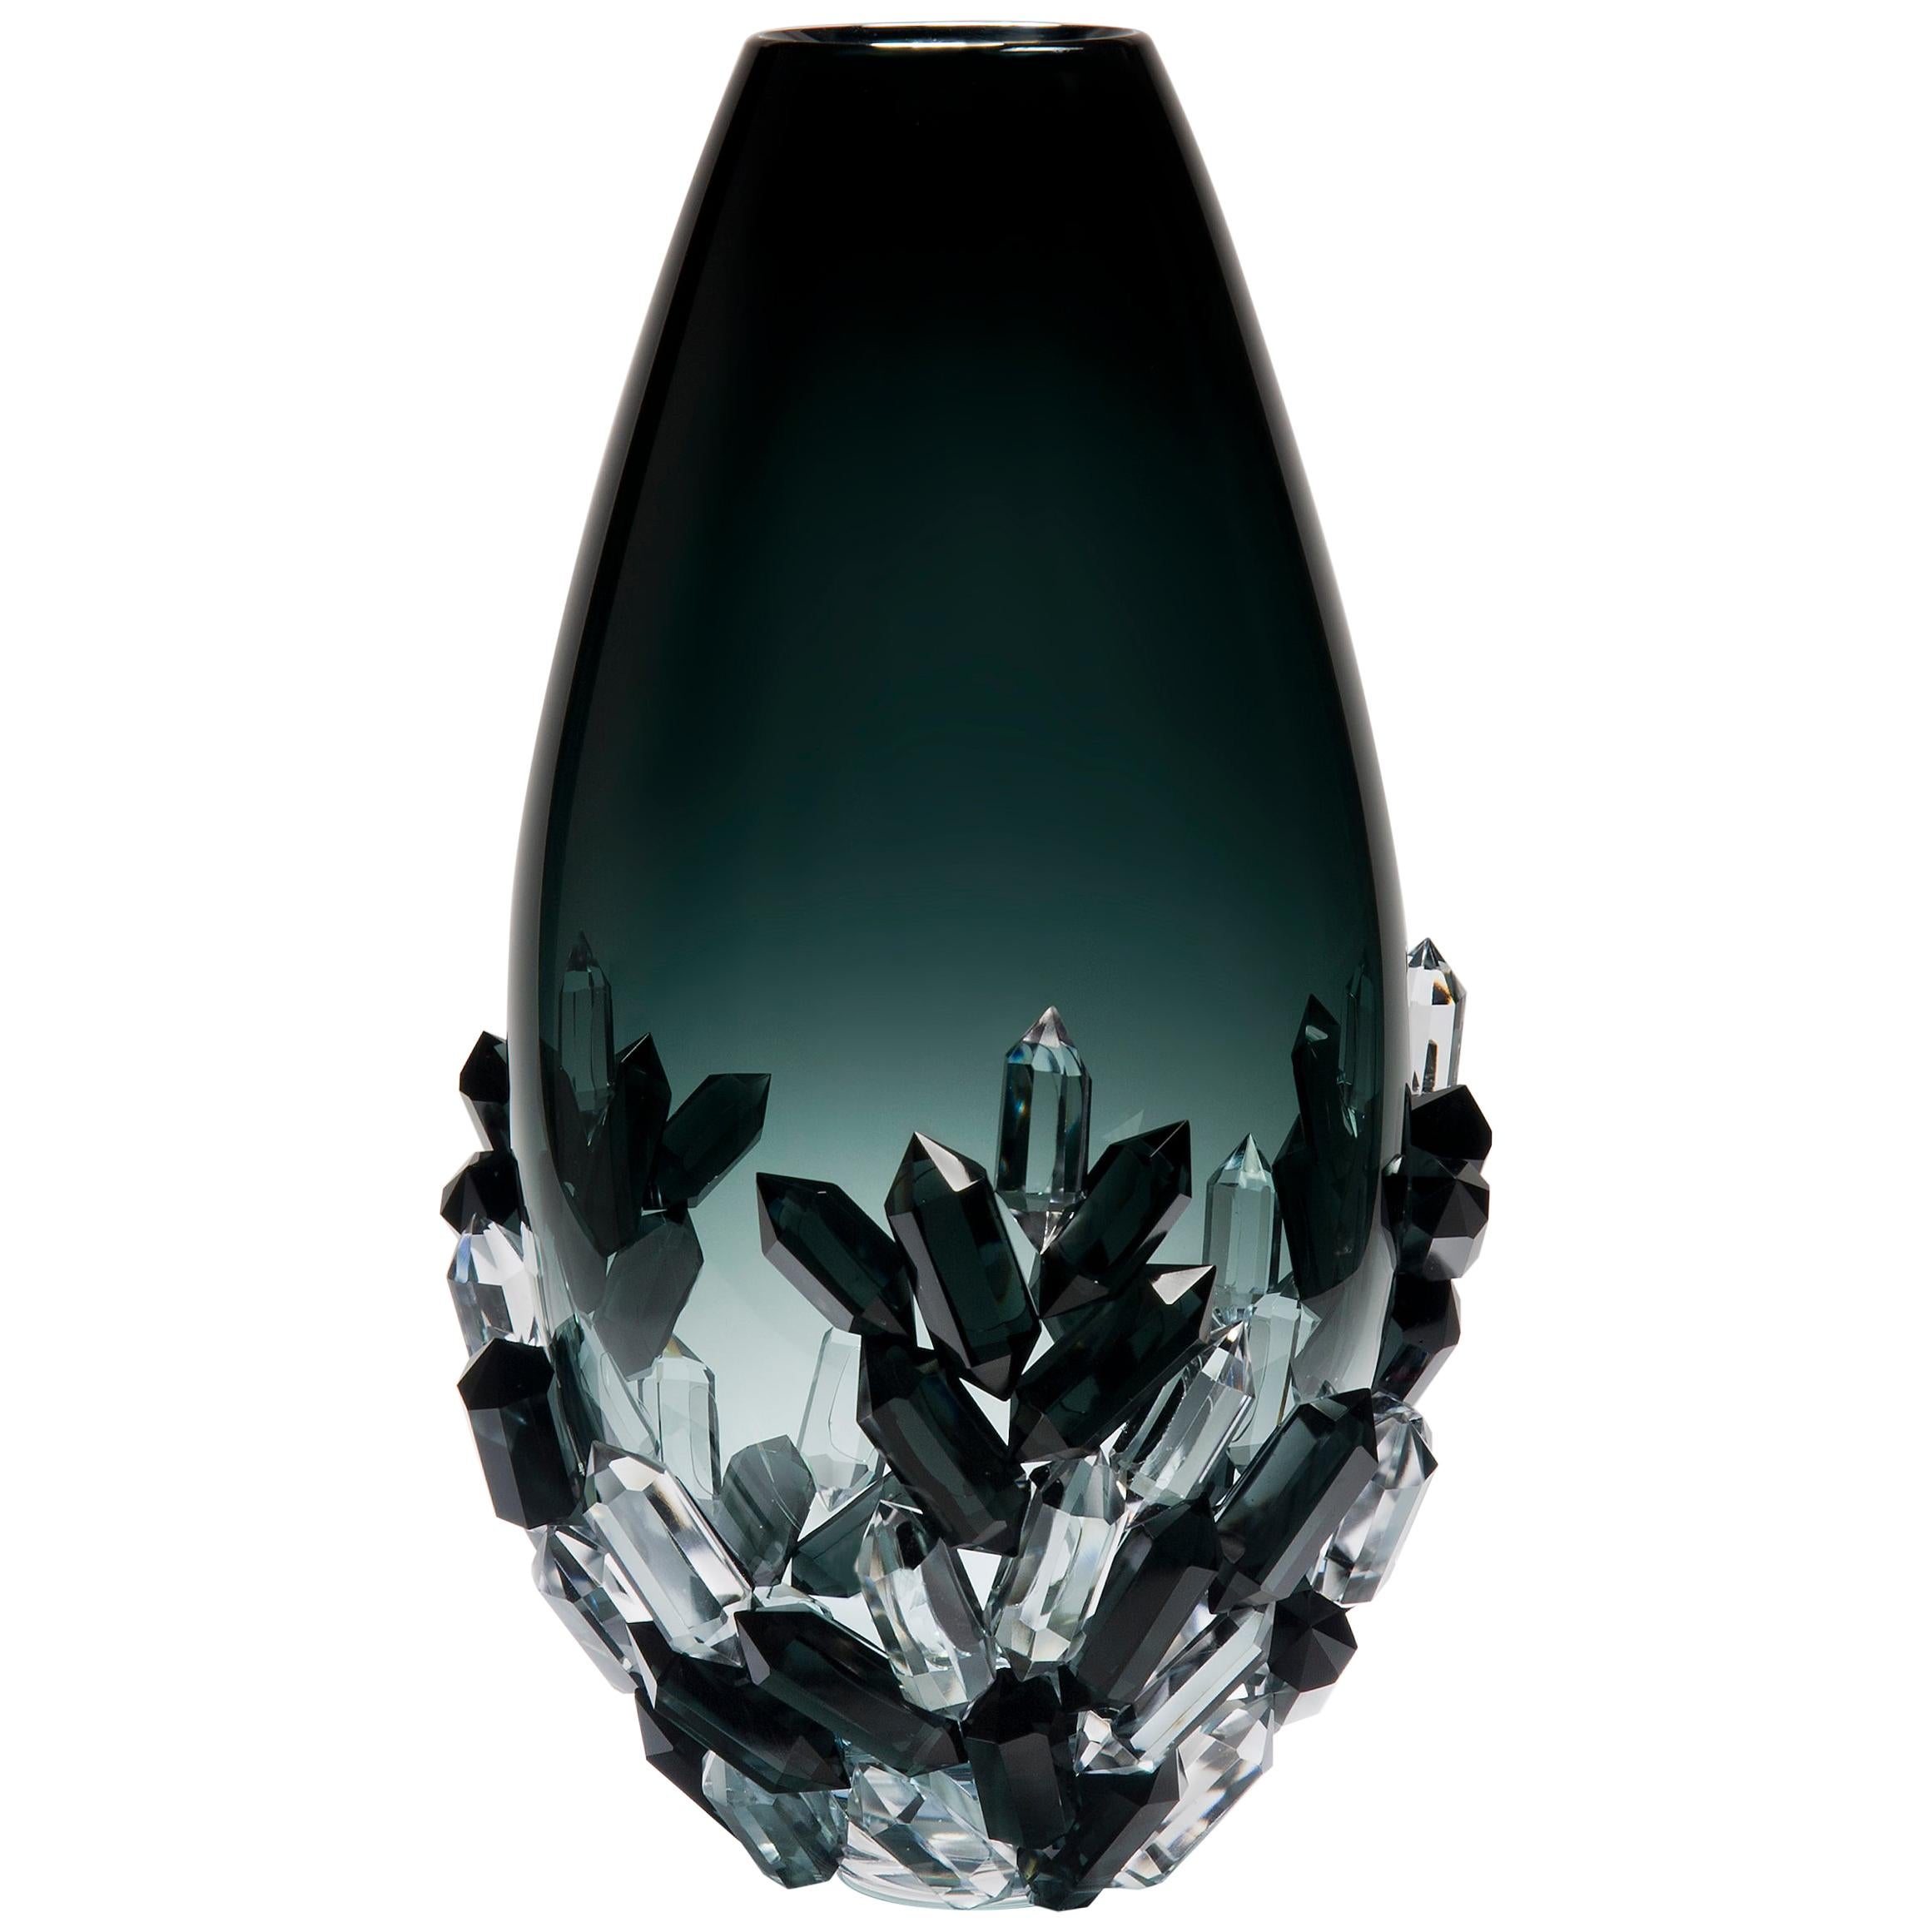 Cristallized Midnight, a Sculptural Blue and Grey Glass Vase by Hanne Enemark